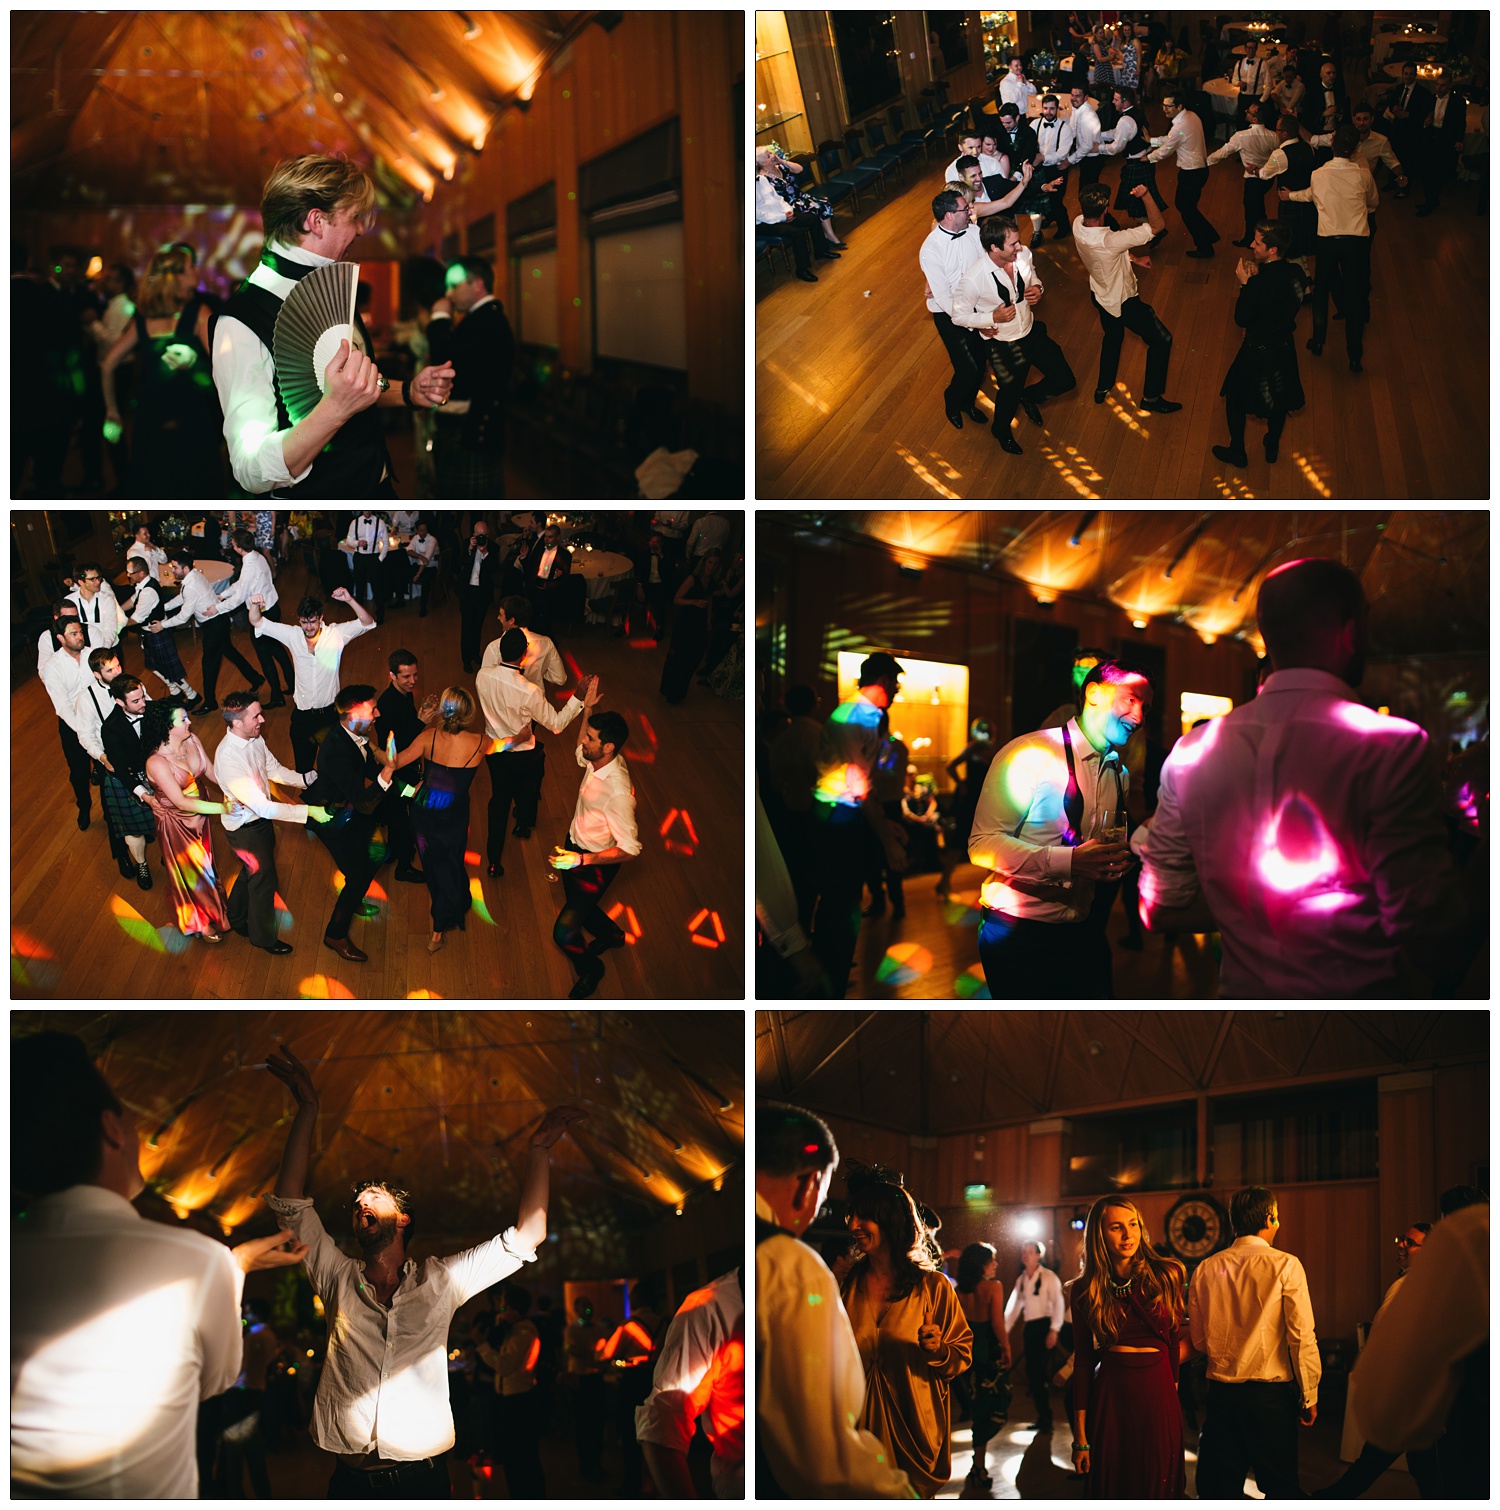 A conga line seen from above at a wedding reception. There are coloured lights. A man has a fan.